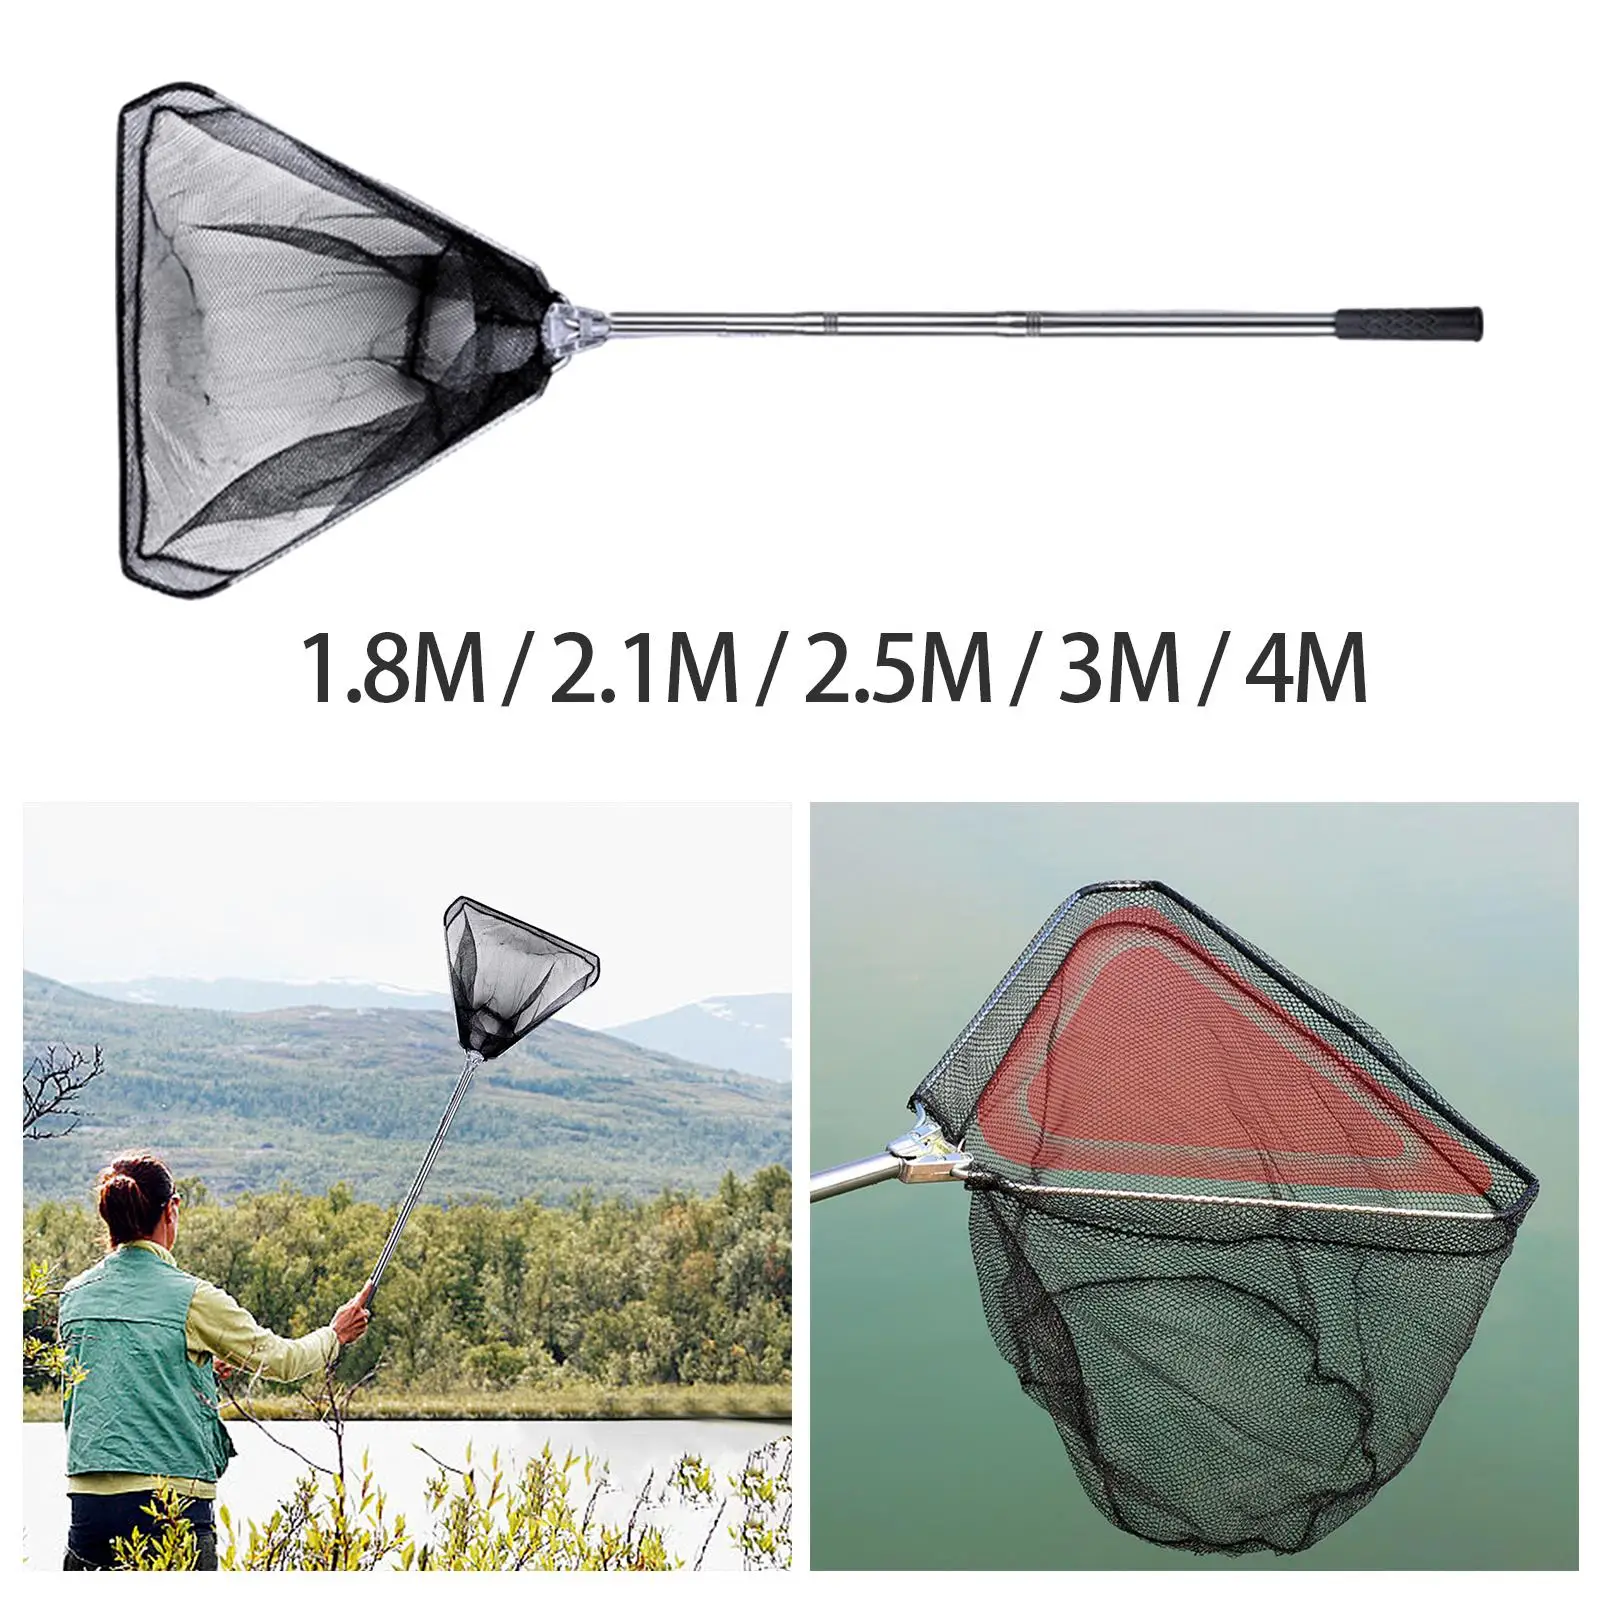 Floating Fish Net Foldable Pole Multipurpose Lightweight Collapsing Handle Accessories Stainless Steel Retractable for Men Gift